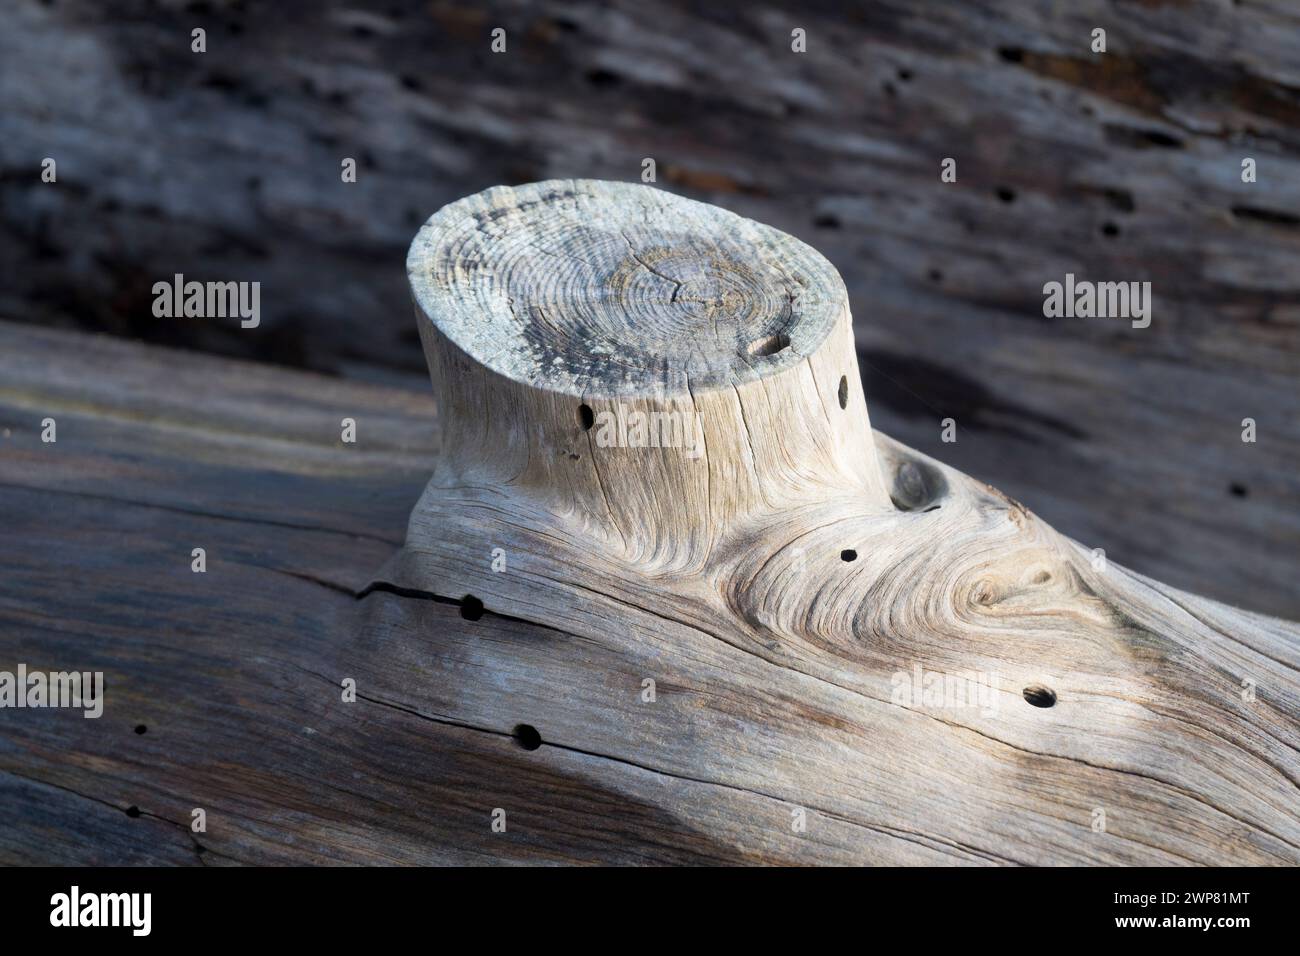 You can find abstract beauty or interesting shapes just about anywhere, if you just look hard enough. These pleasing shapes and bleached wood are a cl Stock Photo